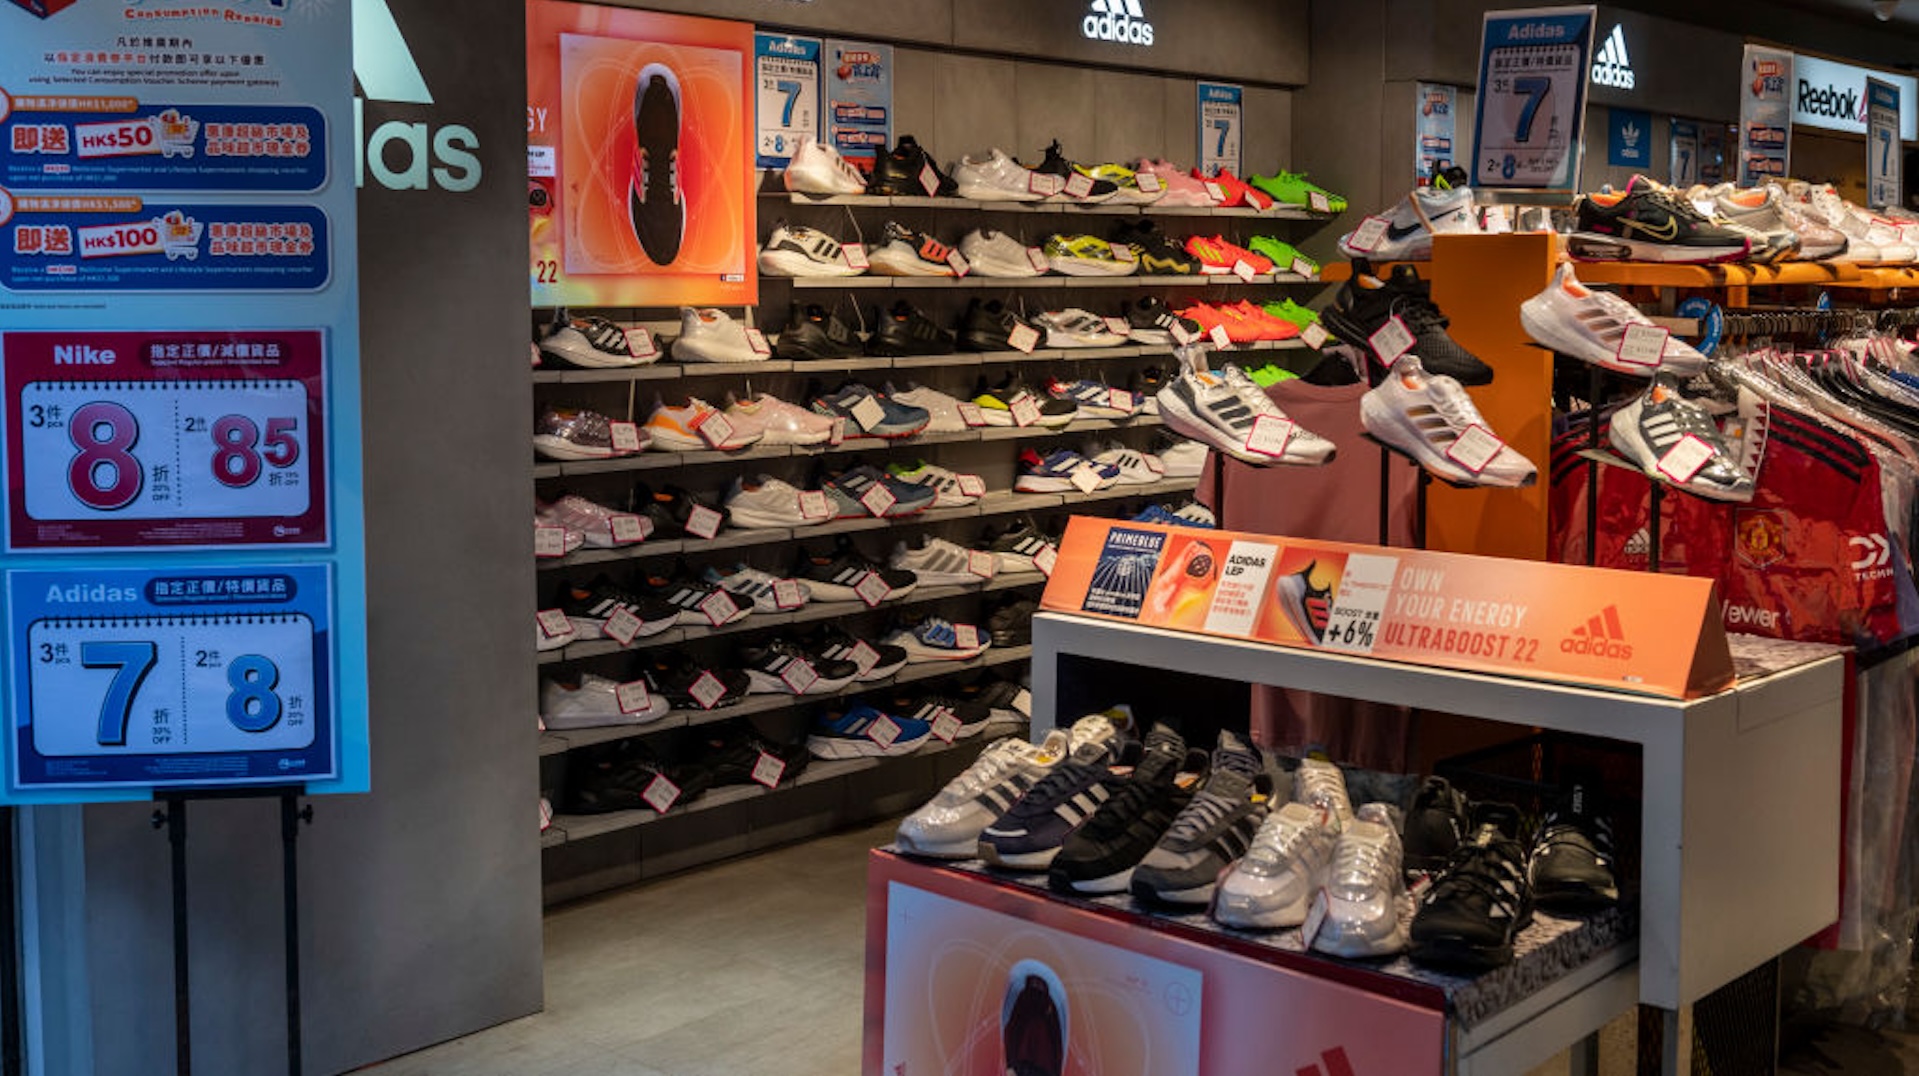 A General view showing a shoe store on August 7, 2022 in Hong Kong, China. Hong Kong residents received Phase 2 of the Consumer Voucher Scheme.